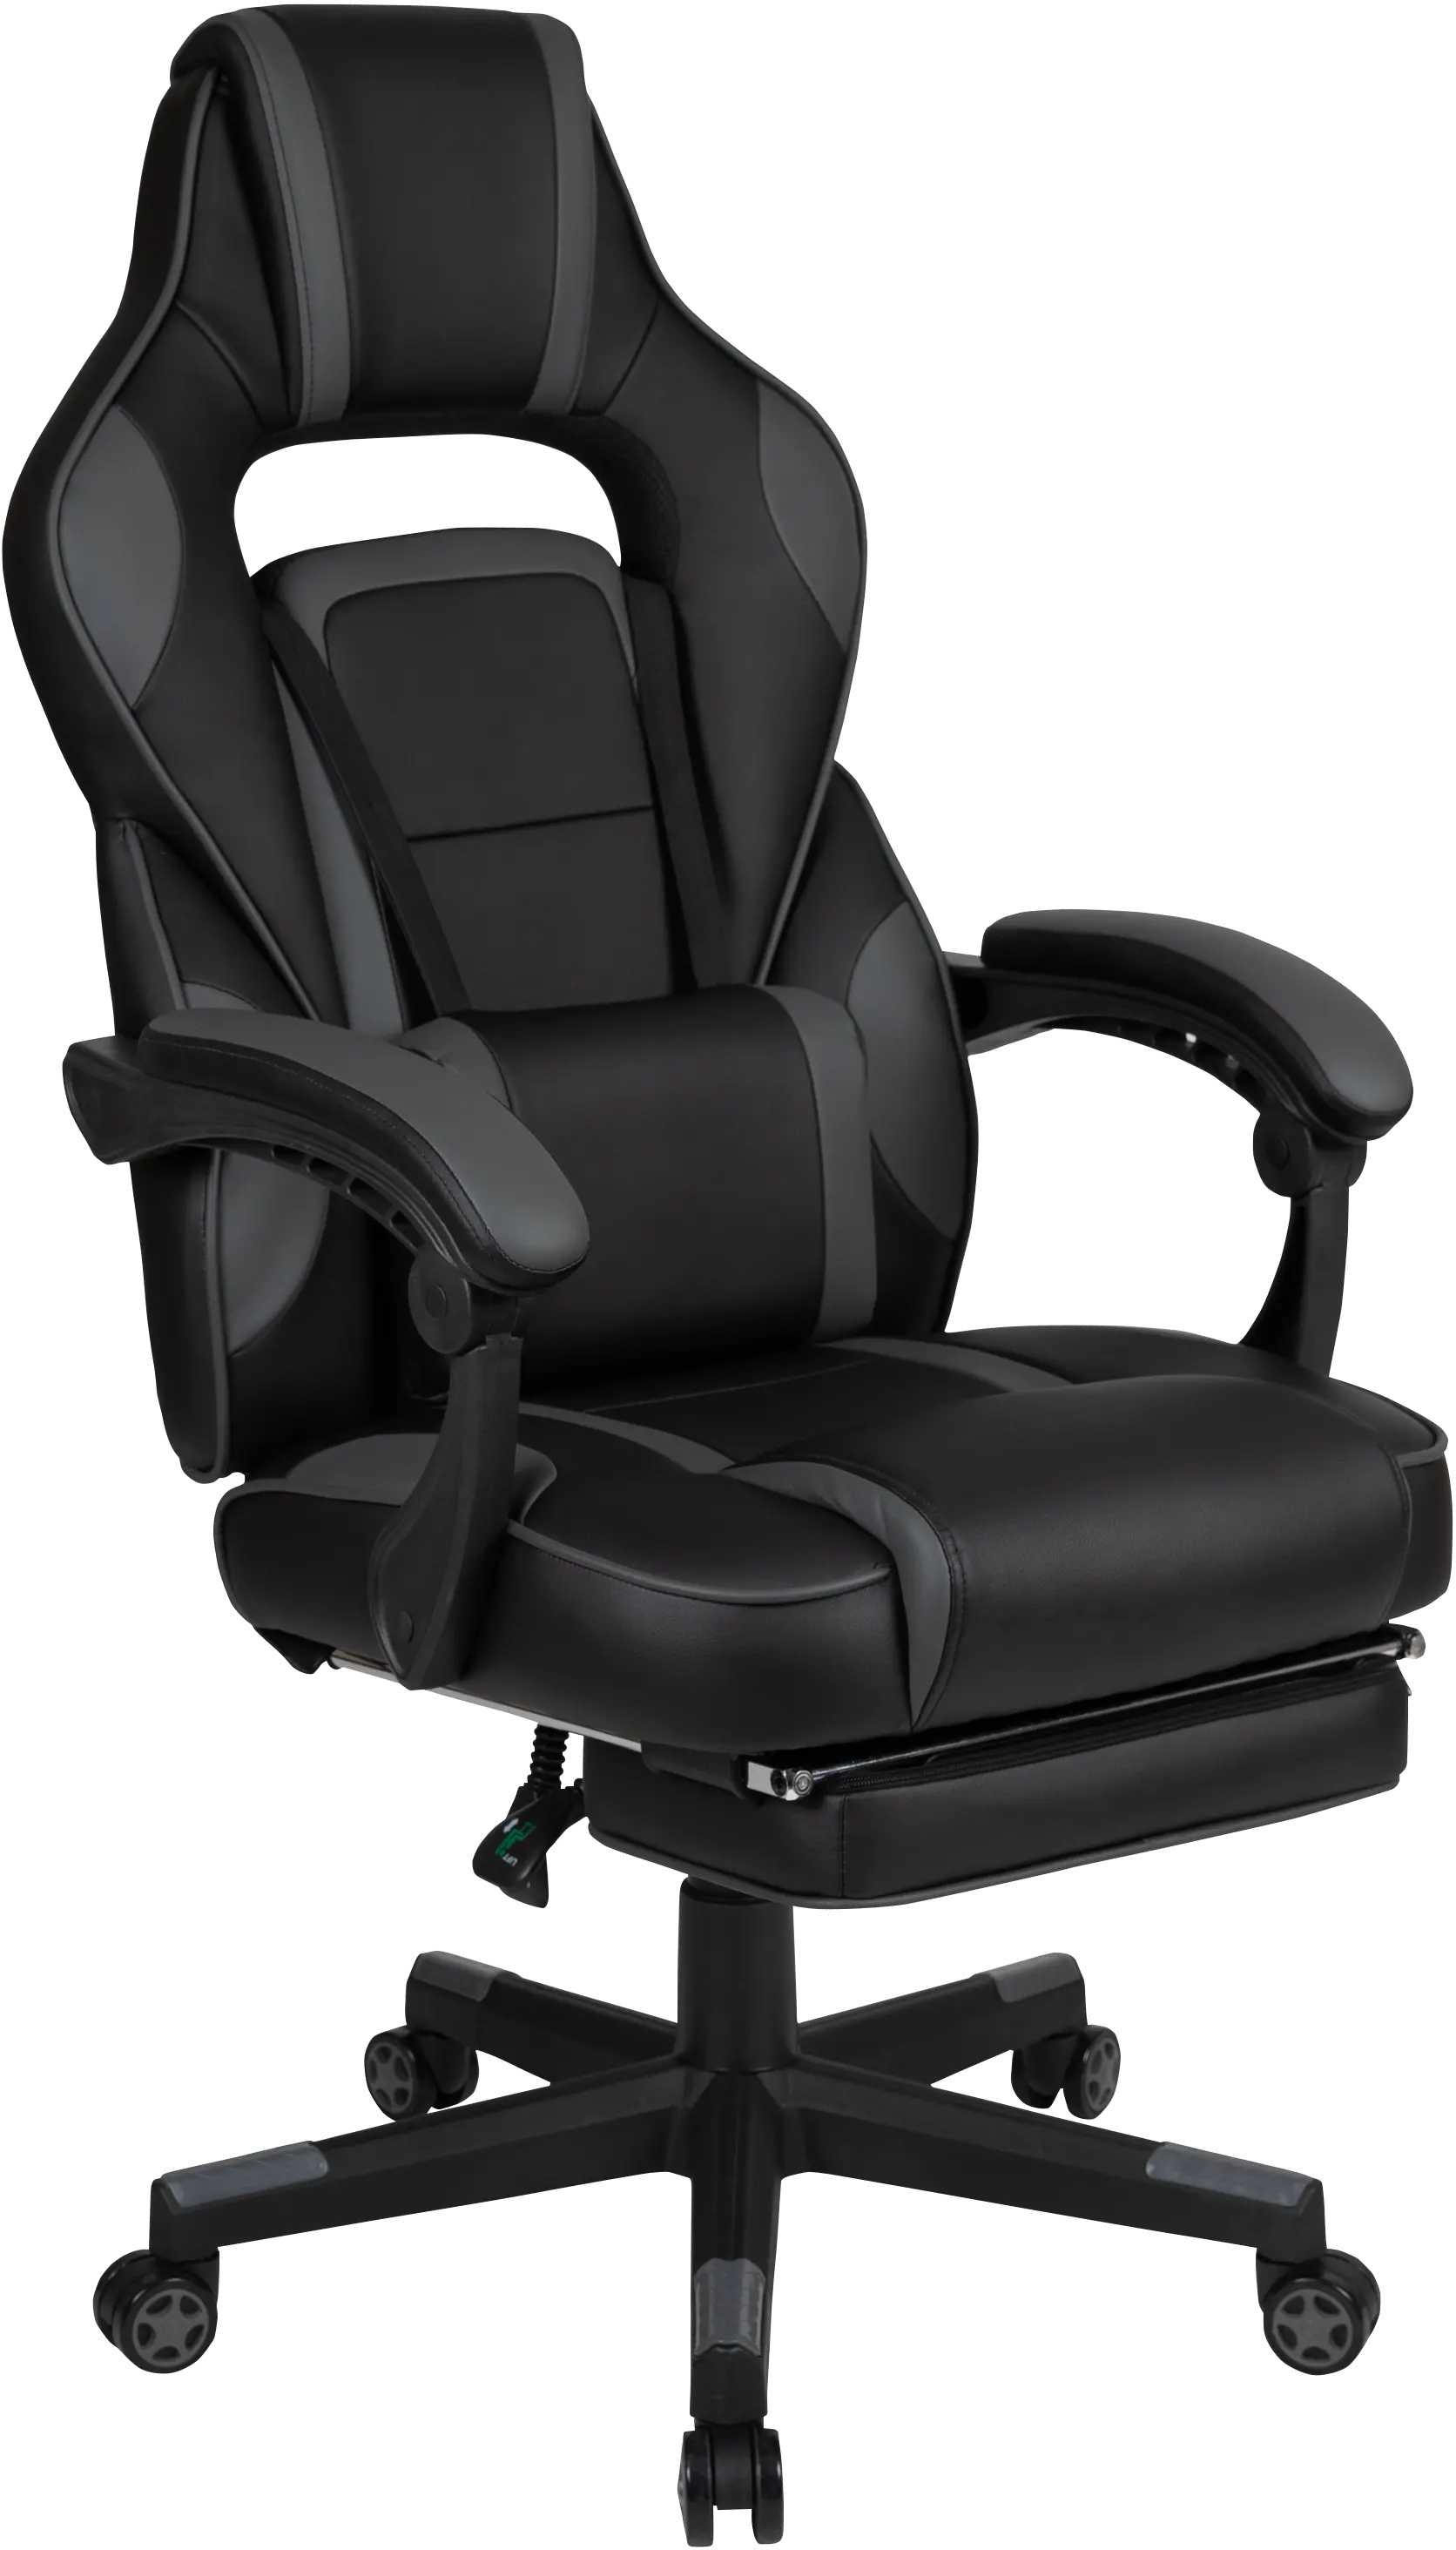 Gray and Black Gaming Swivel Chair - X40